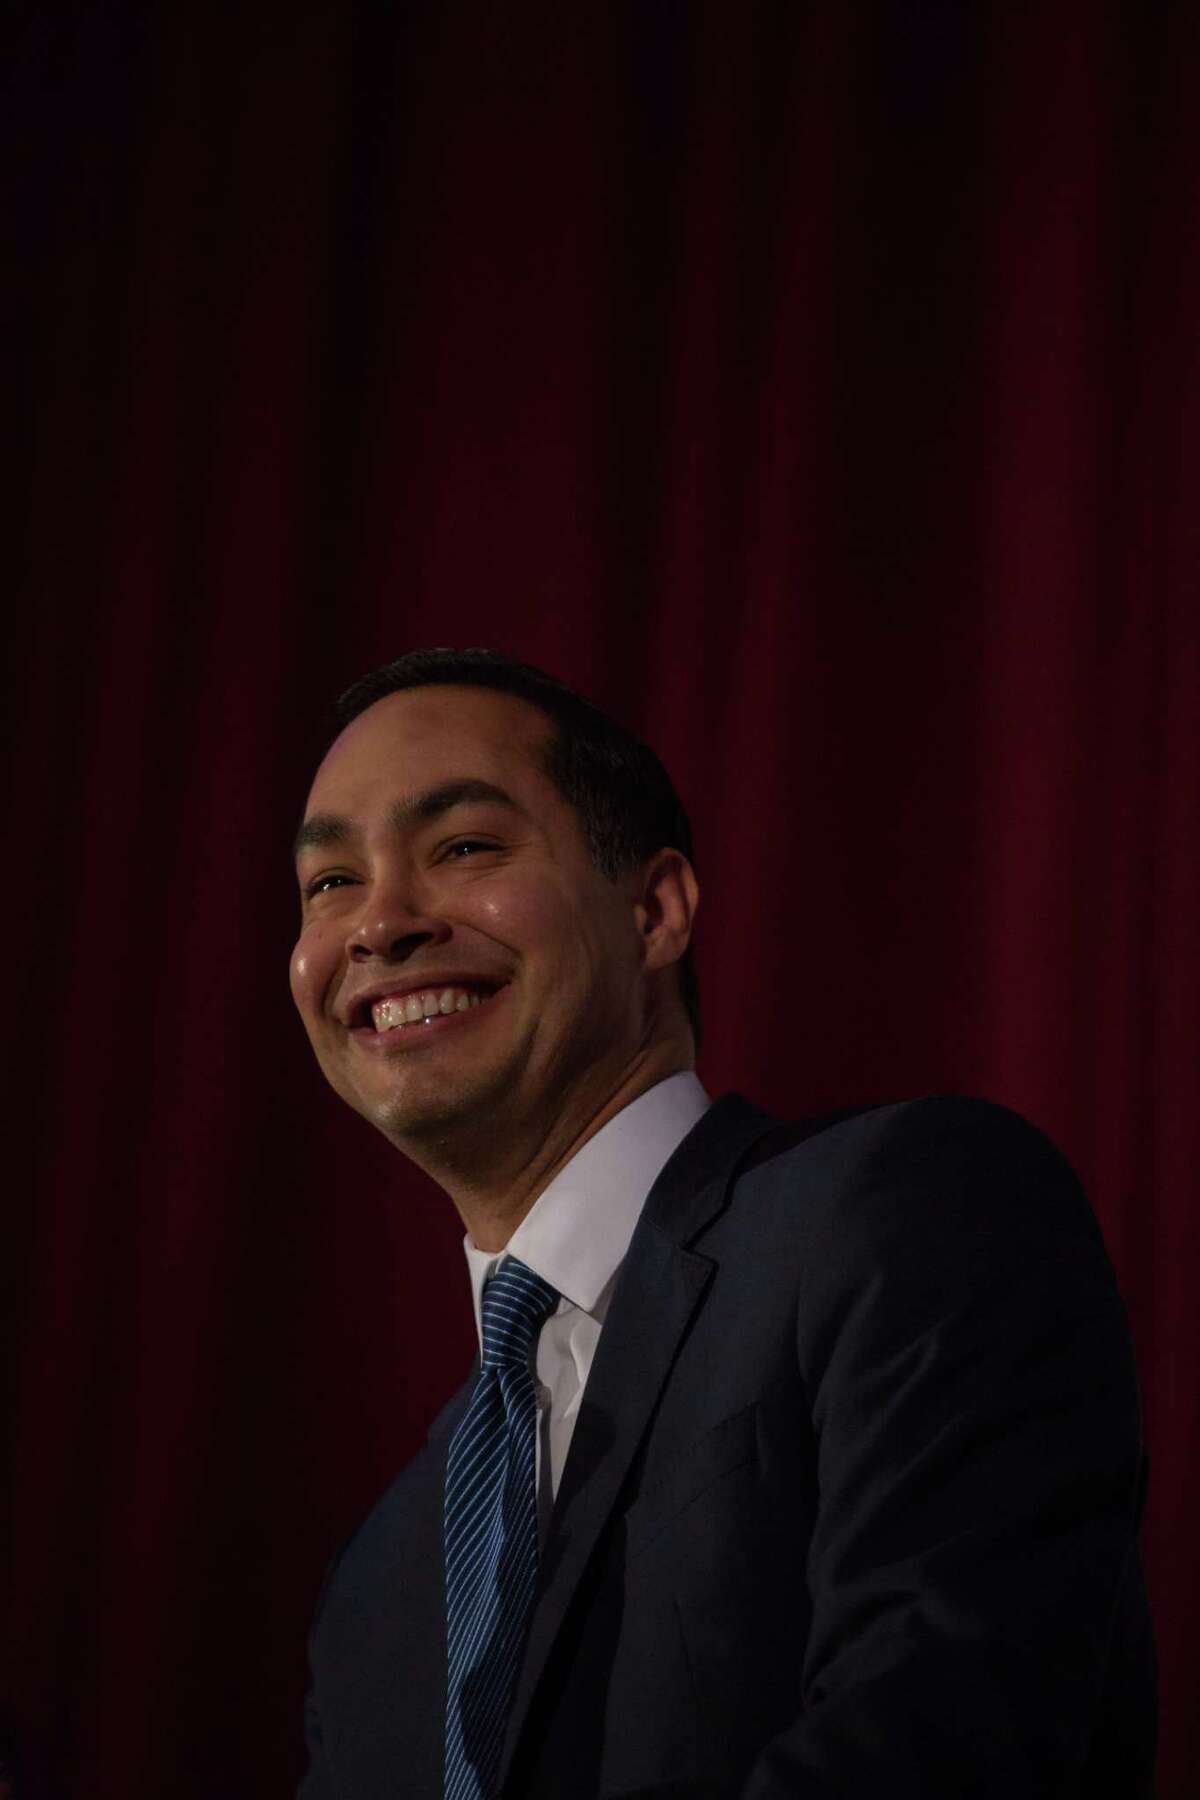 Former Housing and Urban Development Secretary, Julián Castro, of San Antonio, Texas, was the keynote speaker during the New Hampshire Young Democrats annual Granite Slate Awards dinner in Manchester, New Hampshire. Castro attended the award dinner as one of several stops while visiting the state on Friday, February 16, 2018. John Tully for the San Antonio Express-News